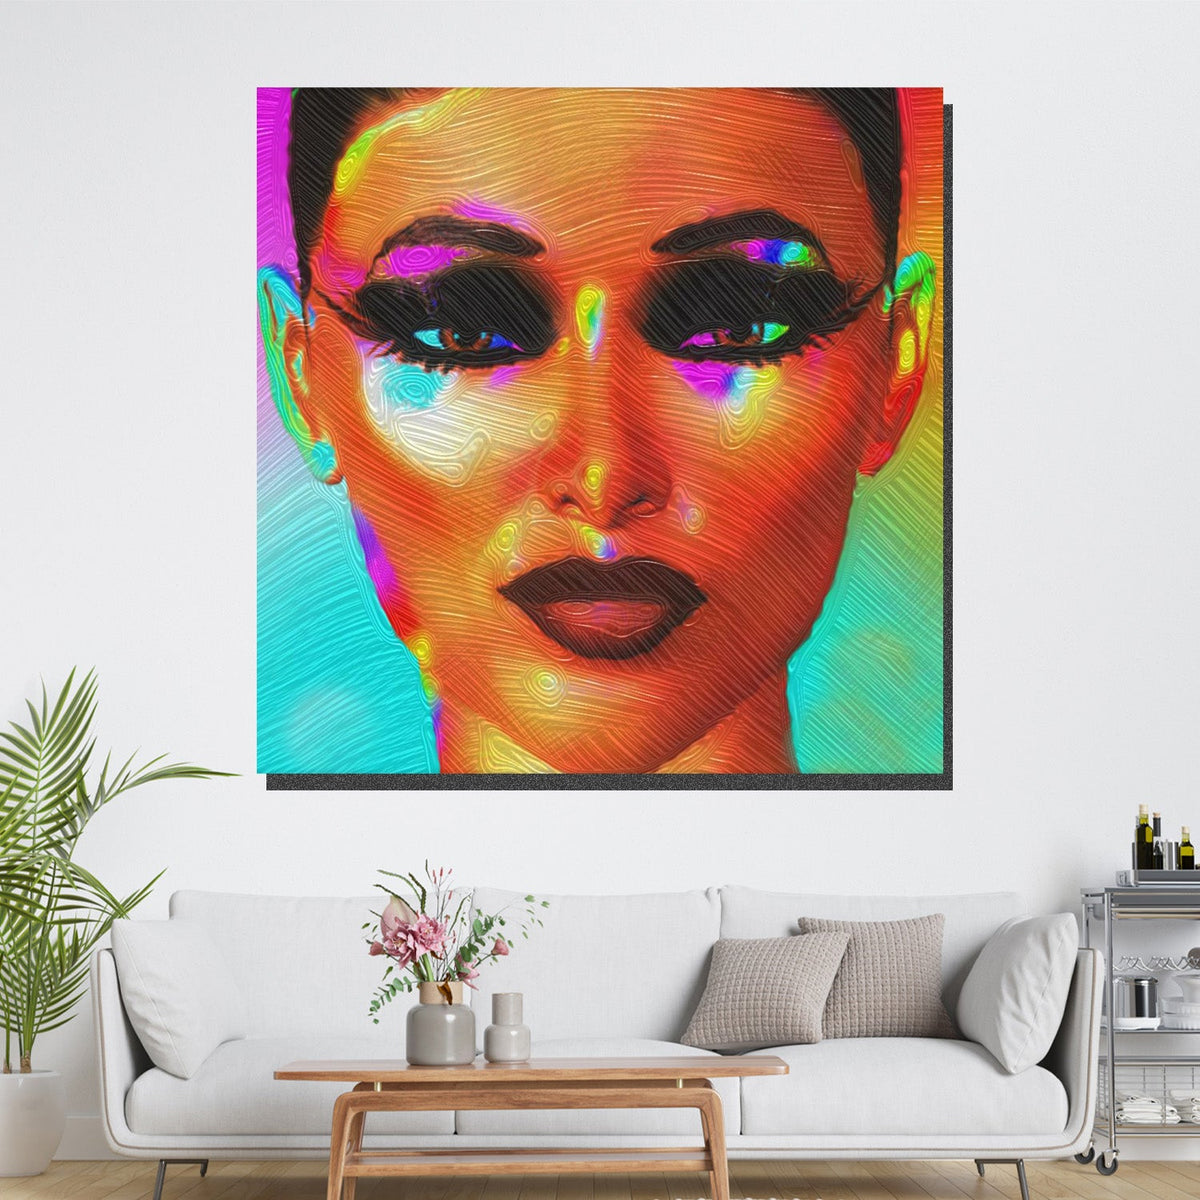 https://cdn.shopify.com/s/files/1/0387/9986/8044/products/IllusionCanvasArtprintStretched-3.jpg